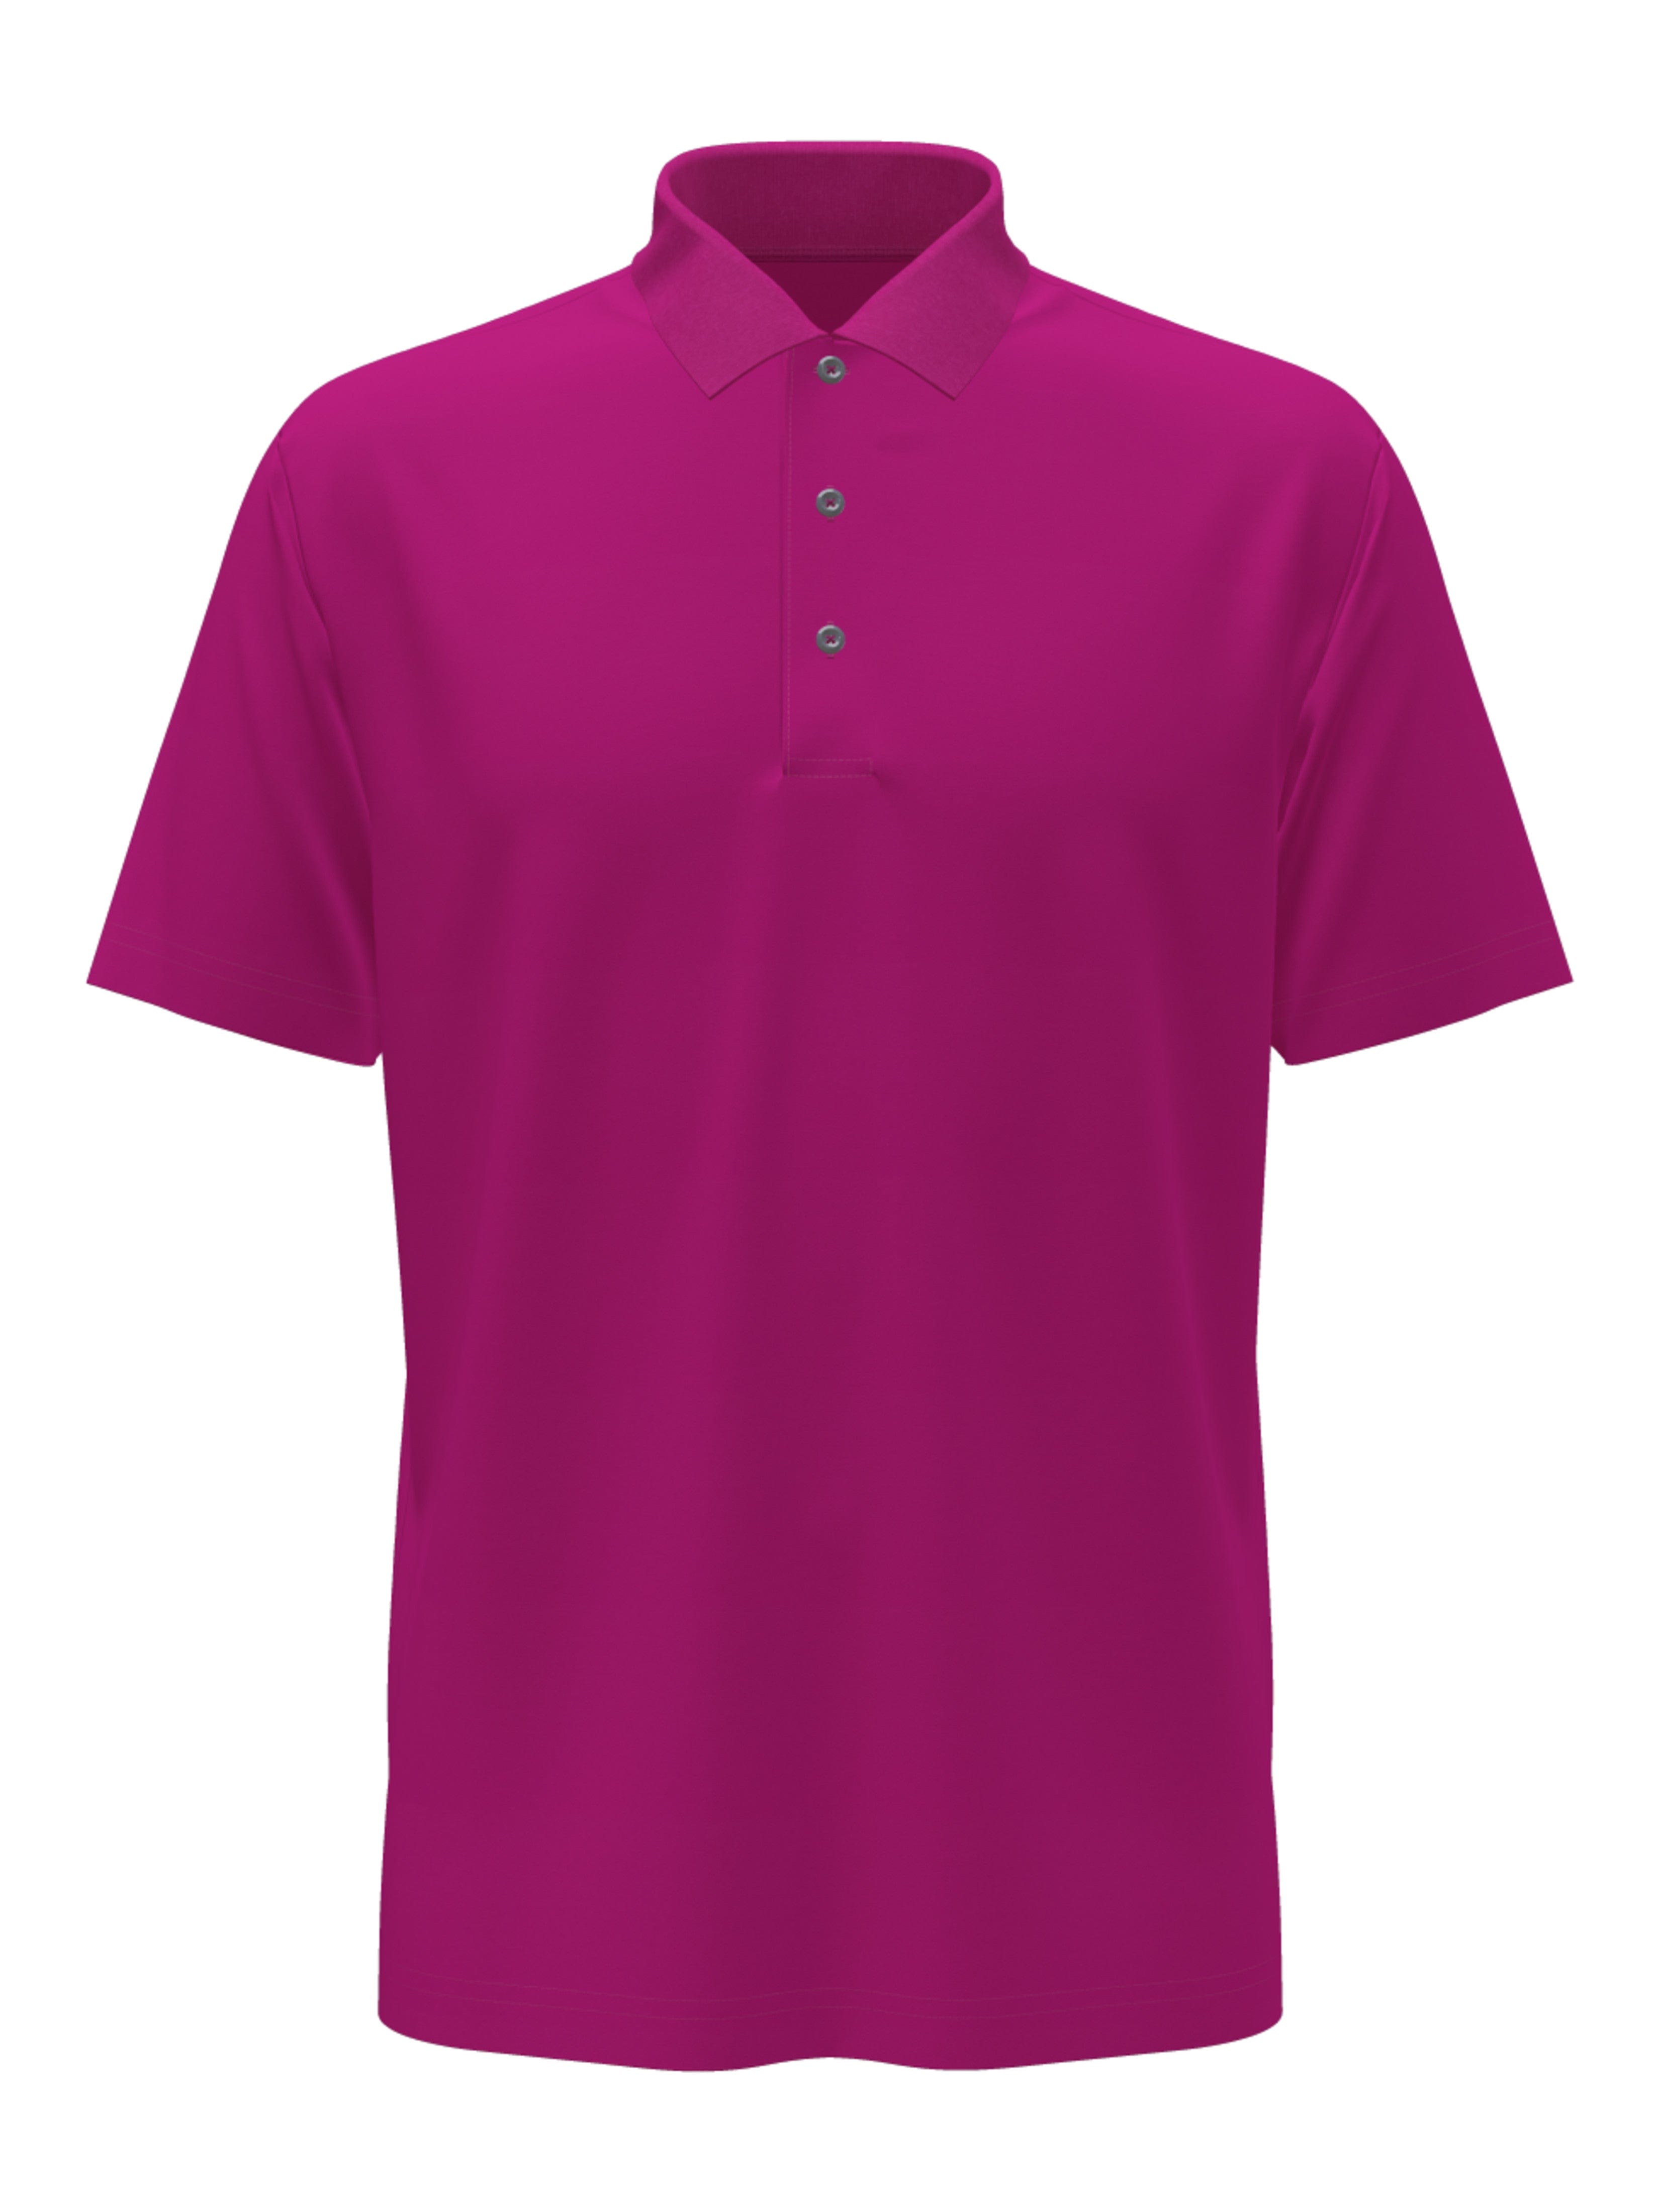 PGA TOUR Apparel Boys AirFlux™ Solid Mesh Golf Polo Shirt, Size Small, Rose Violet Pink, 100% Polyester | Golf Apparel Shop